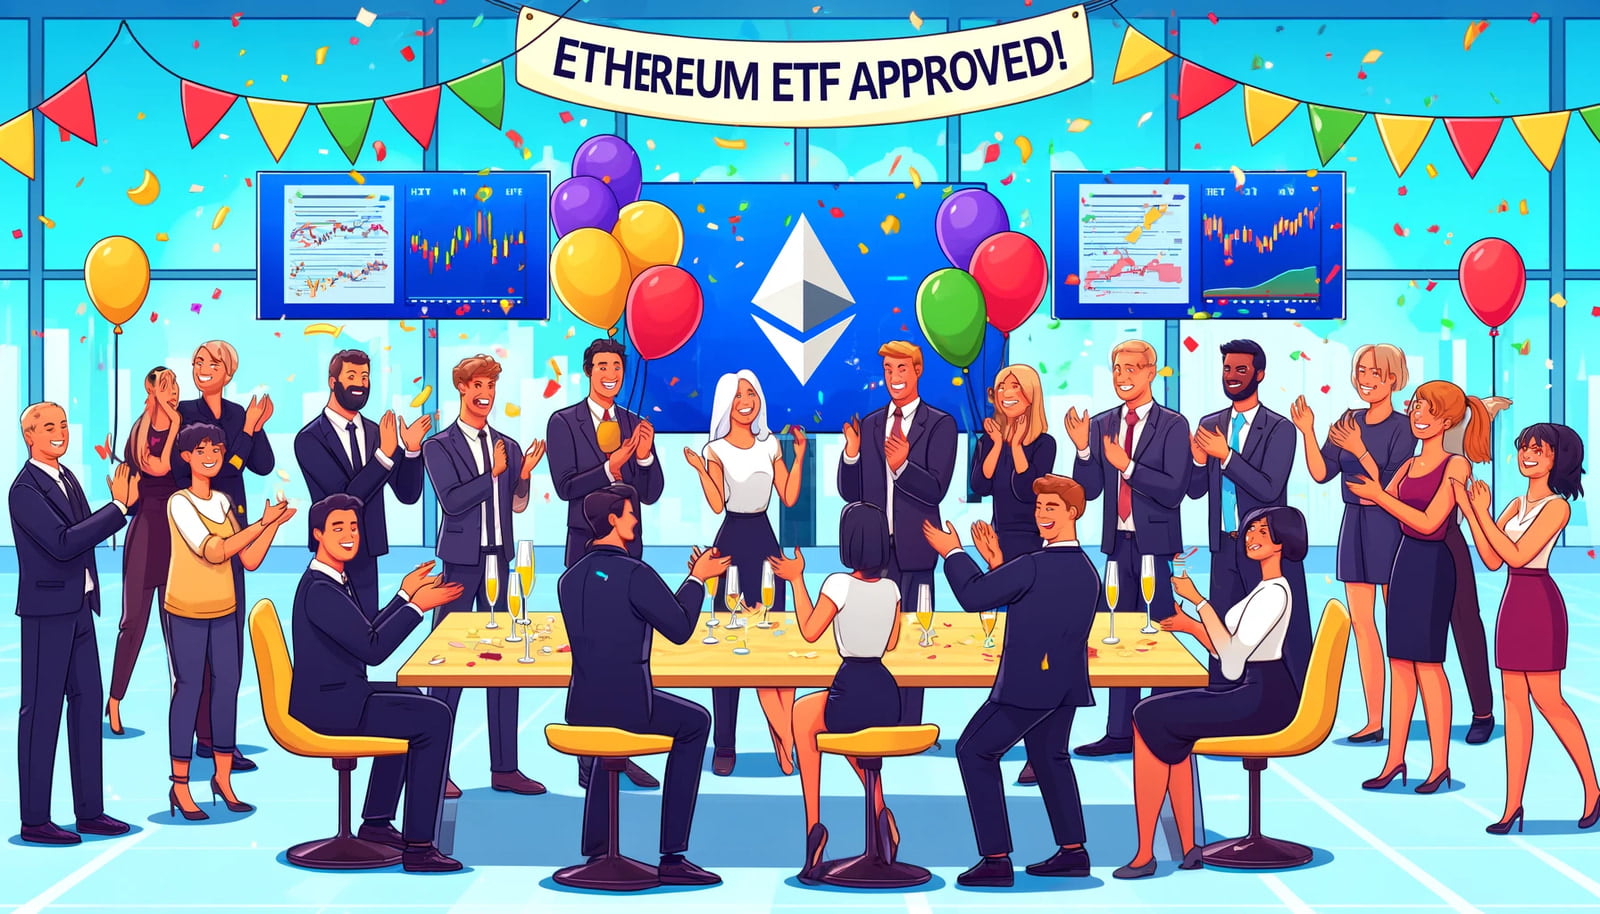 Spot Ethereum ETF Approved! What's Next?